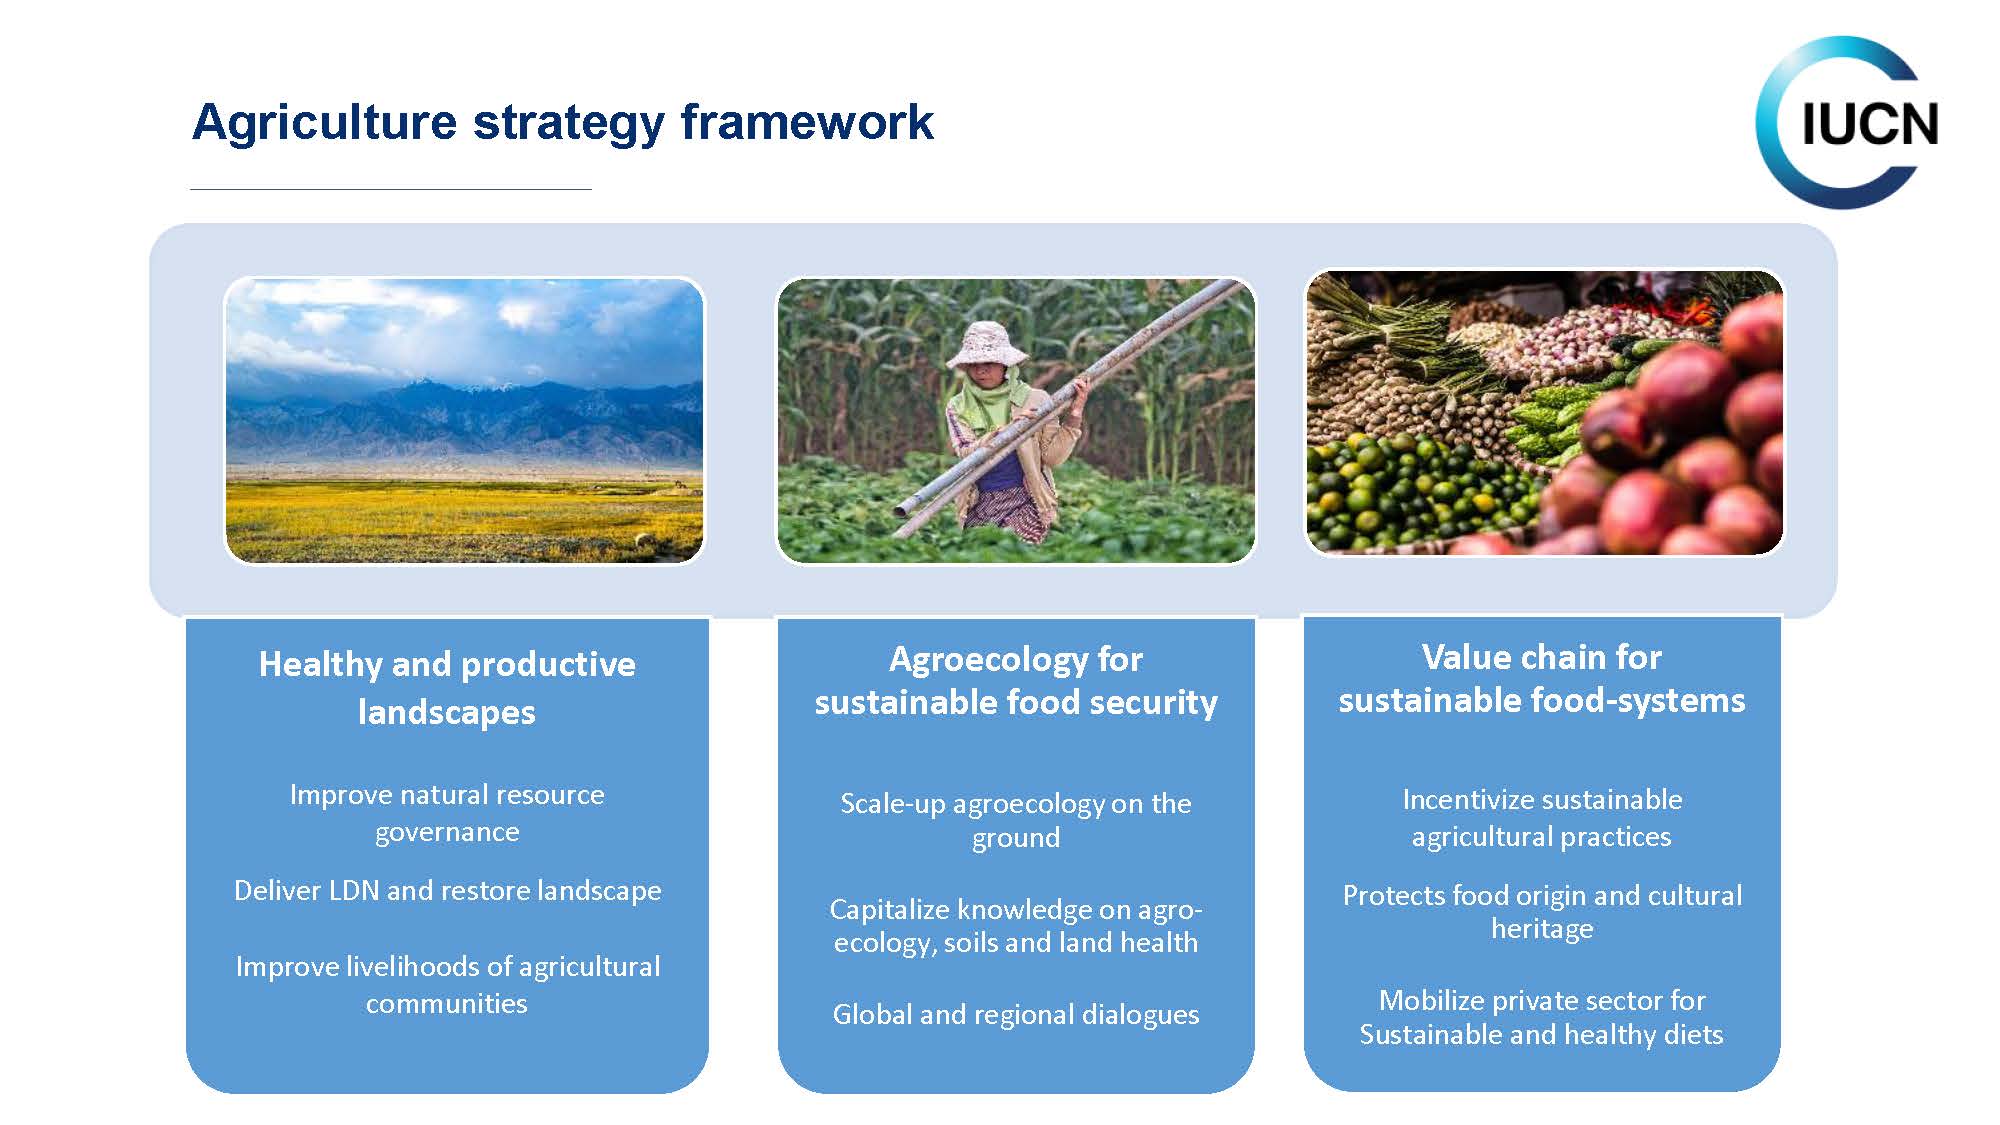 IUCN Agriculture Strategy Framework